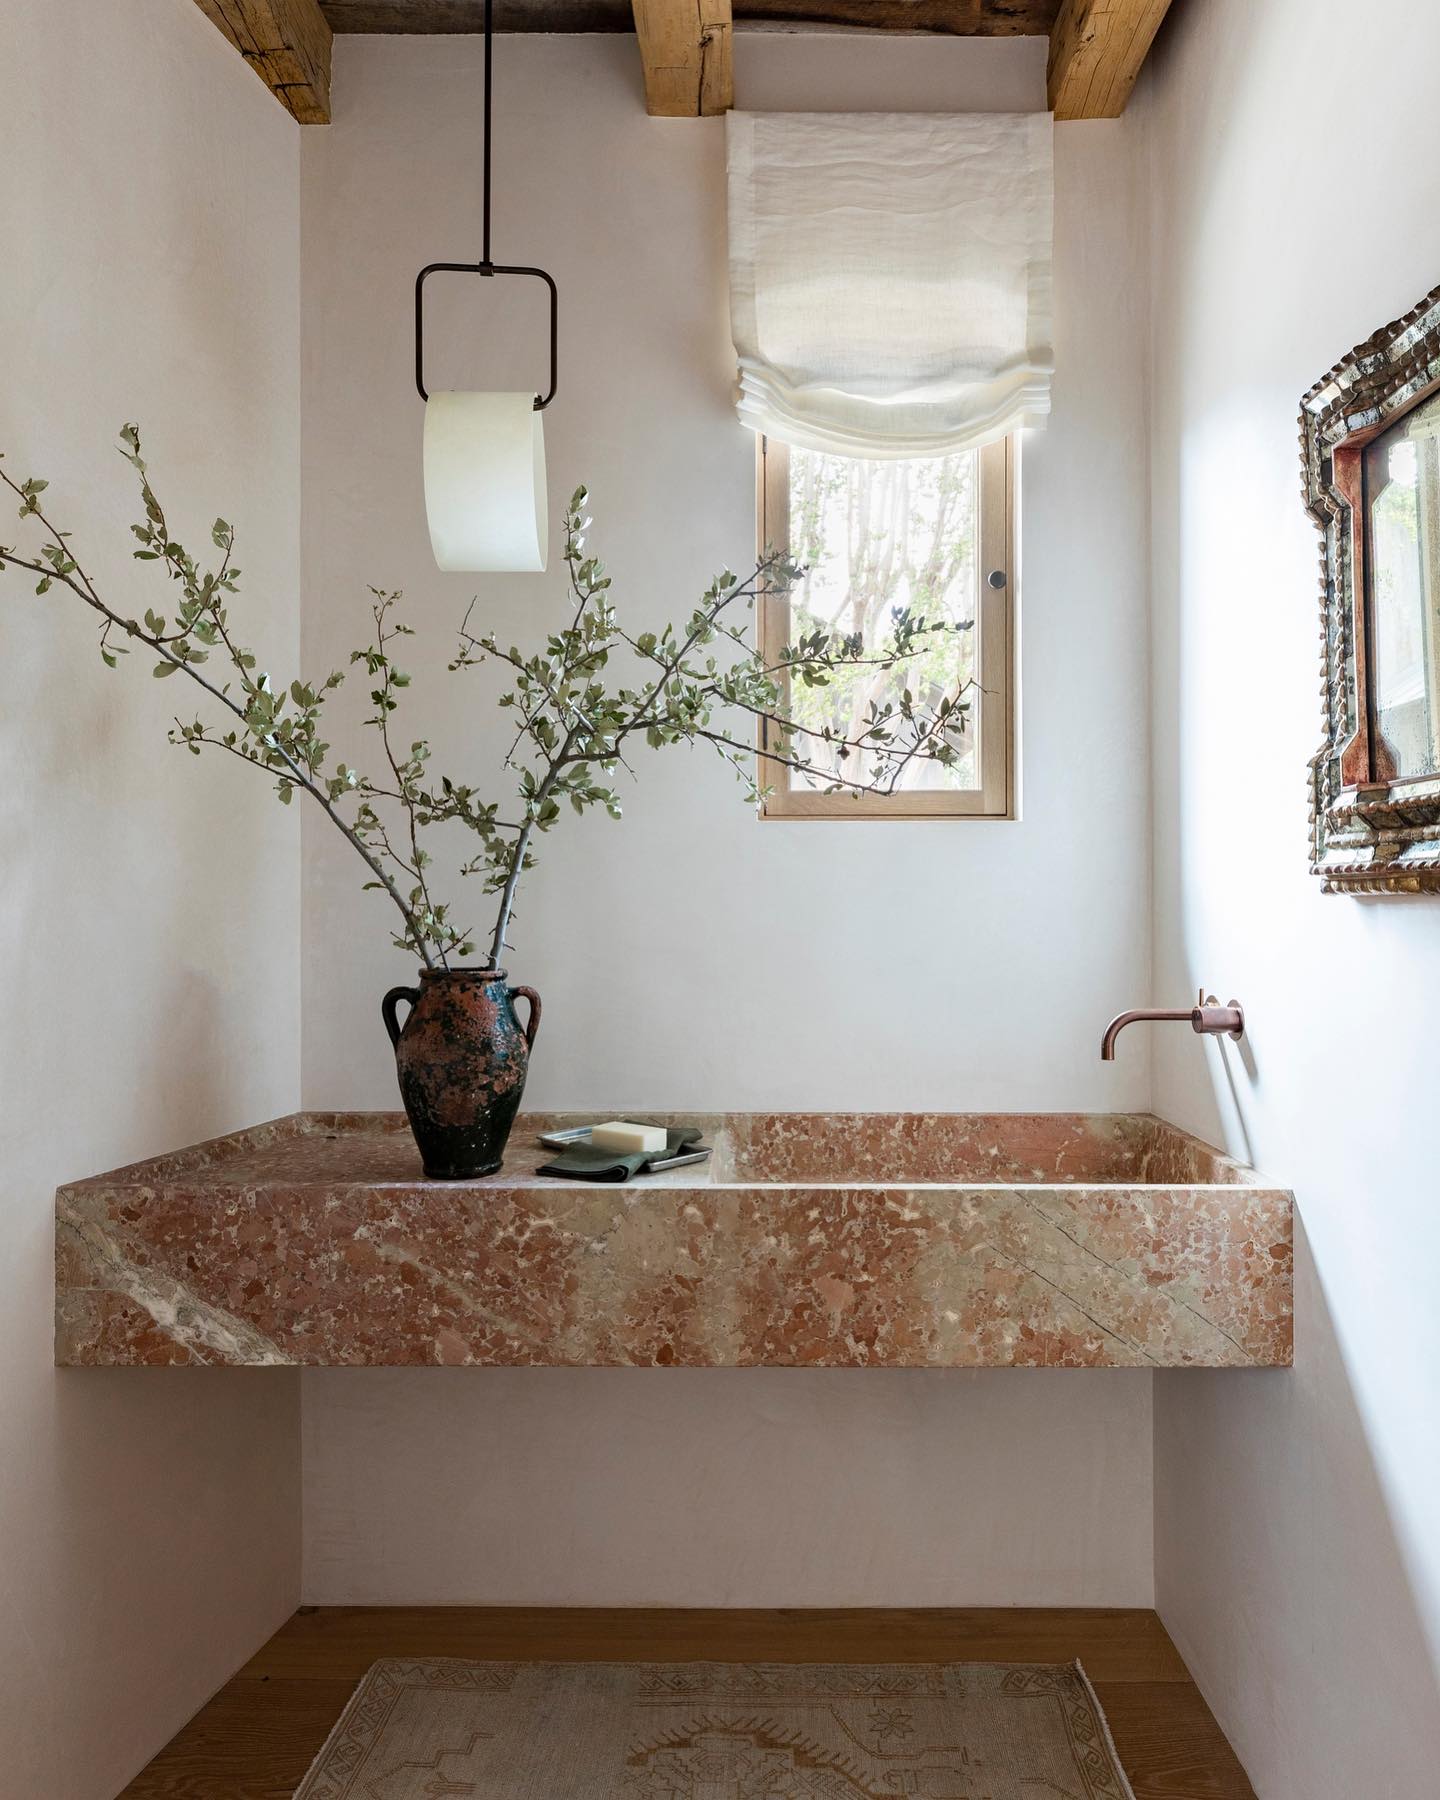 Modern rustic earthy luxe bath by Marie Flanigan Interiors.